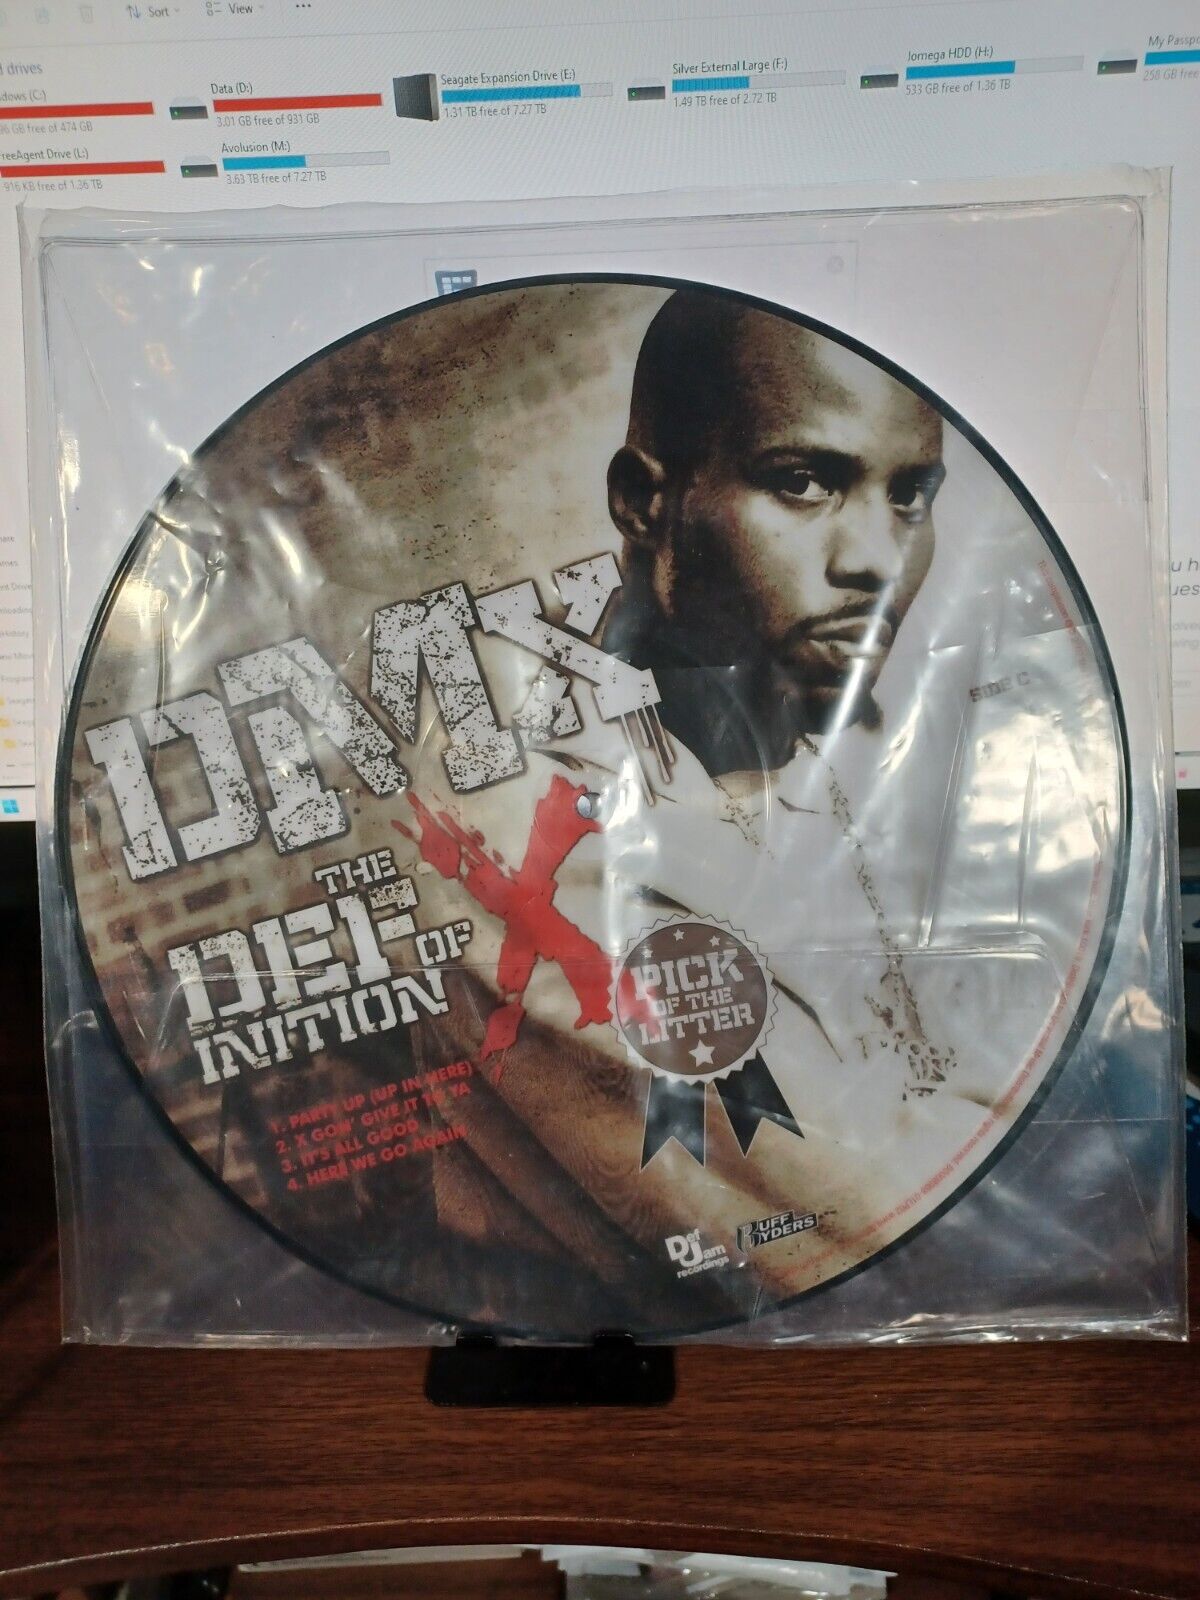 Definition of X: The Pick of the Litter by DMX (Record, 2007)